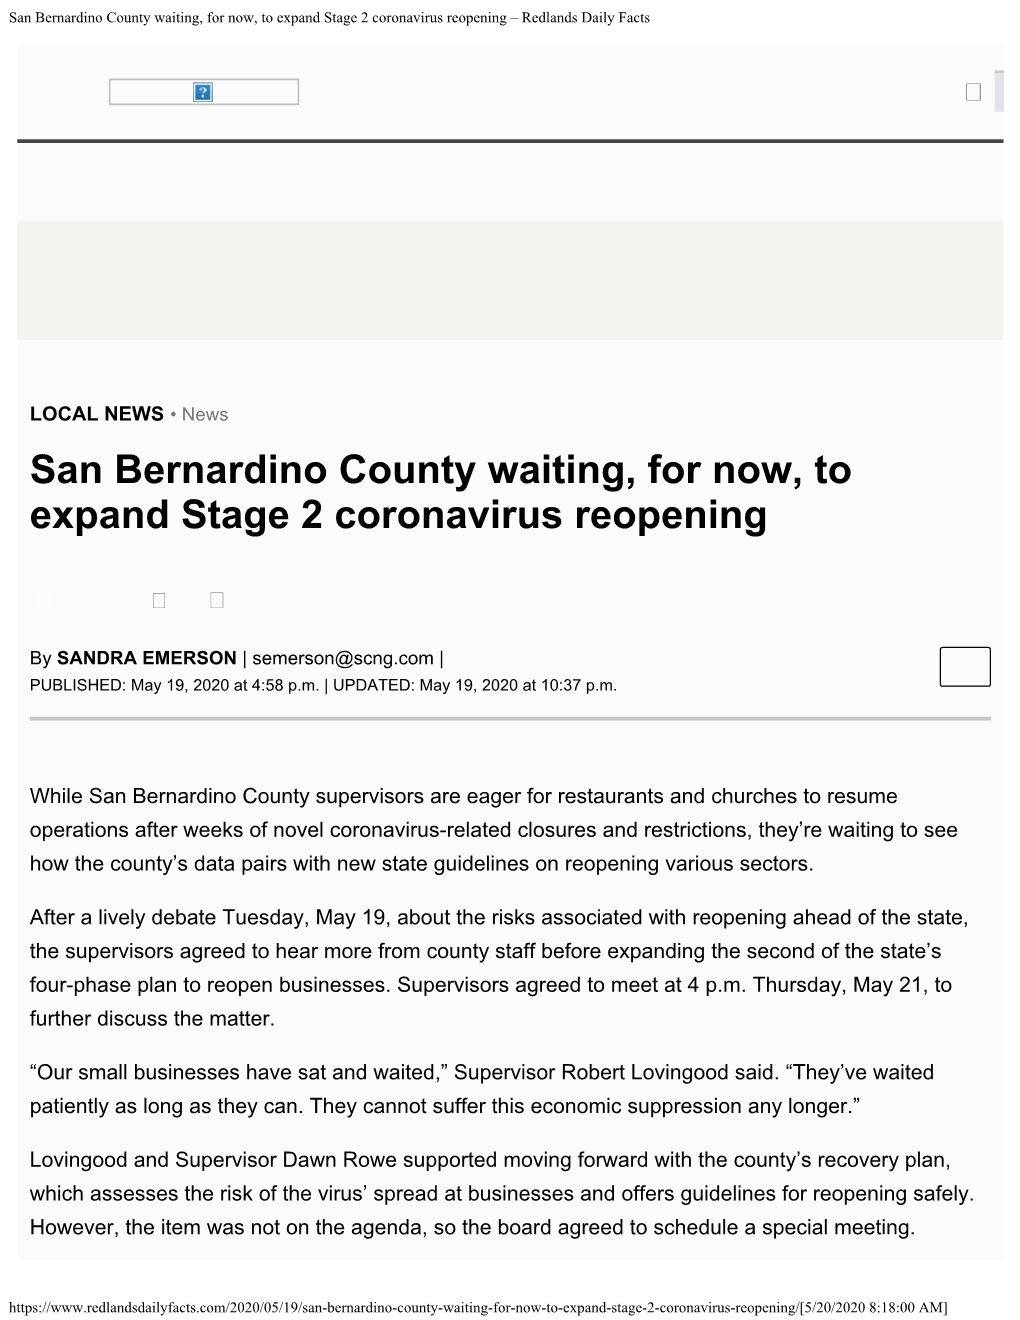 San Bernardino County Waiting, for Now, to Expand Stage 2 Coronavirus Reopening – Redlands Daily Facts